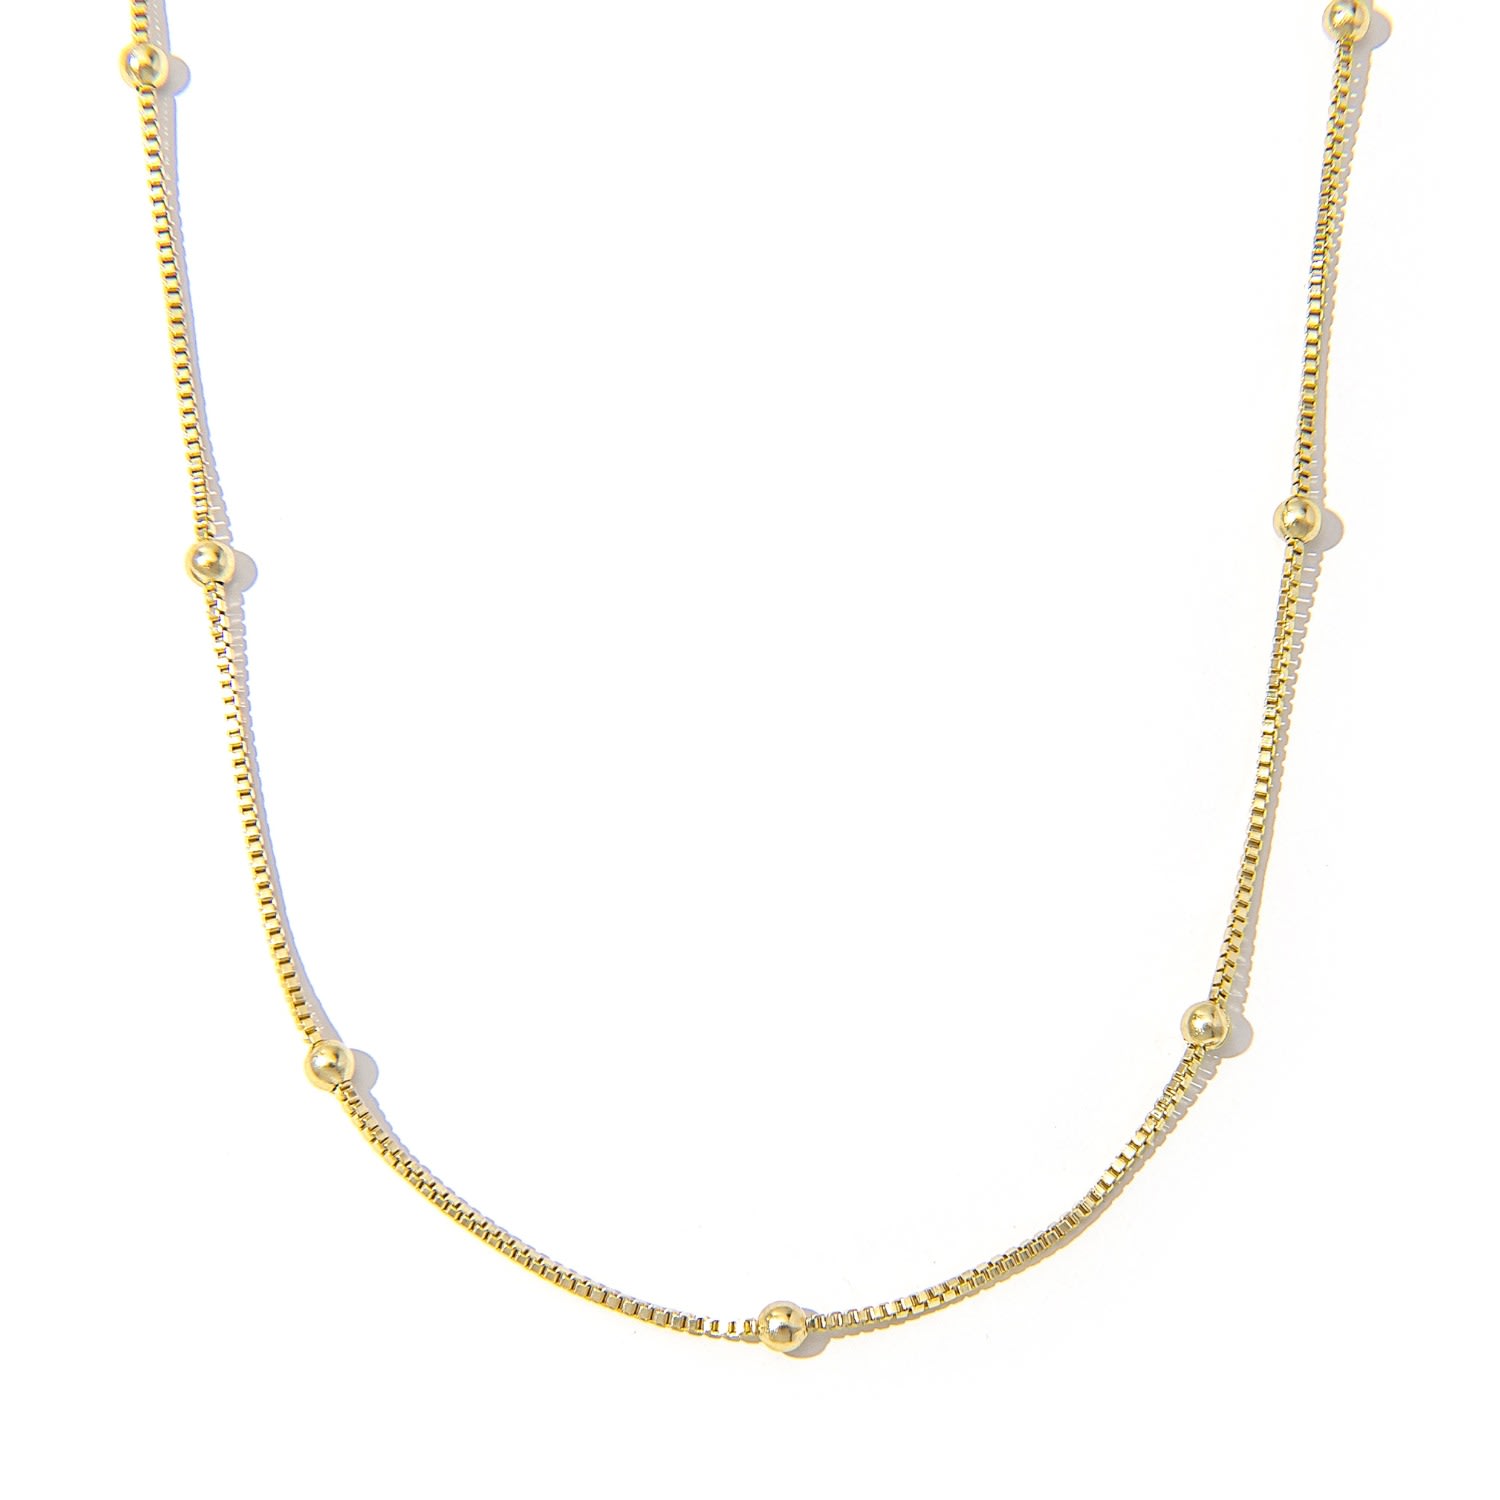 Women’s Gold Filled Satellite Beaded Chain The Essential Jewels